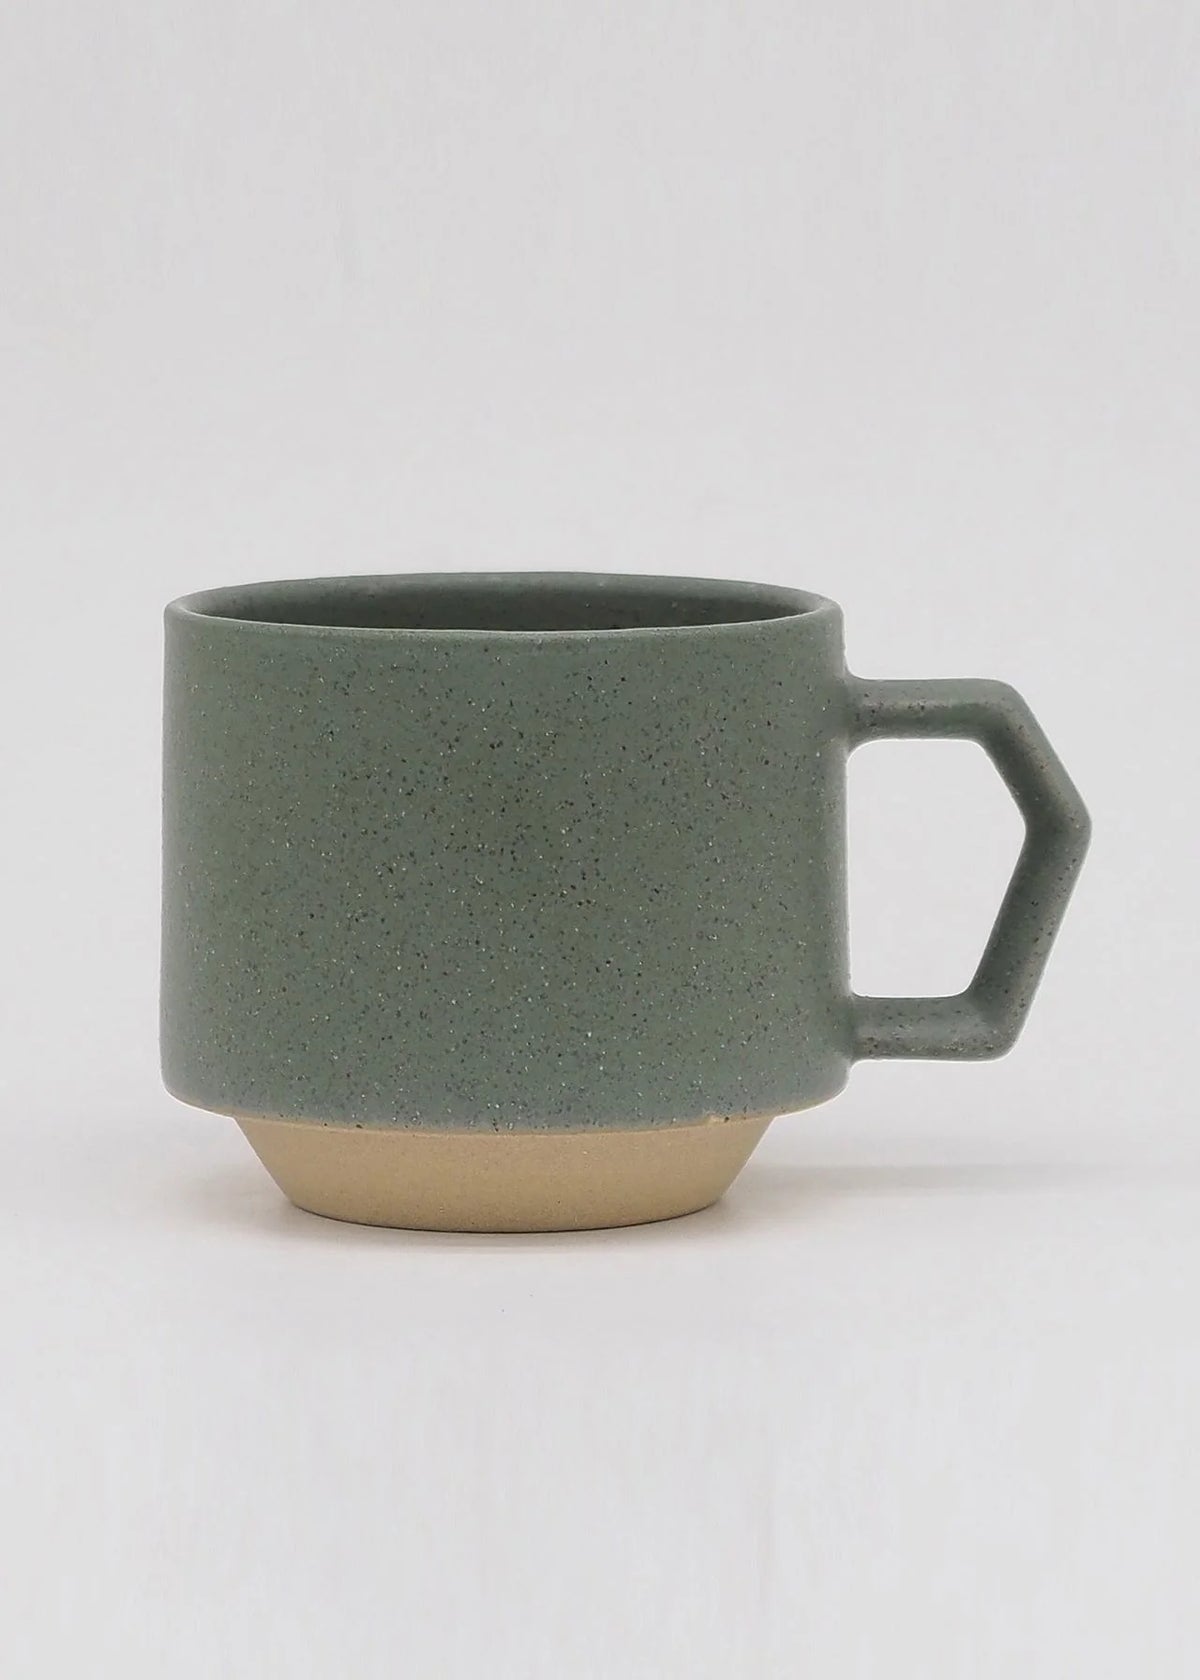 A Stacking Mug - Khaki with a handle on a white background.